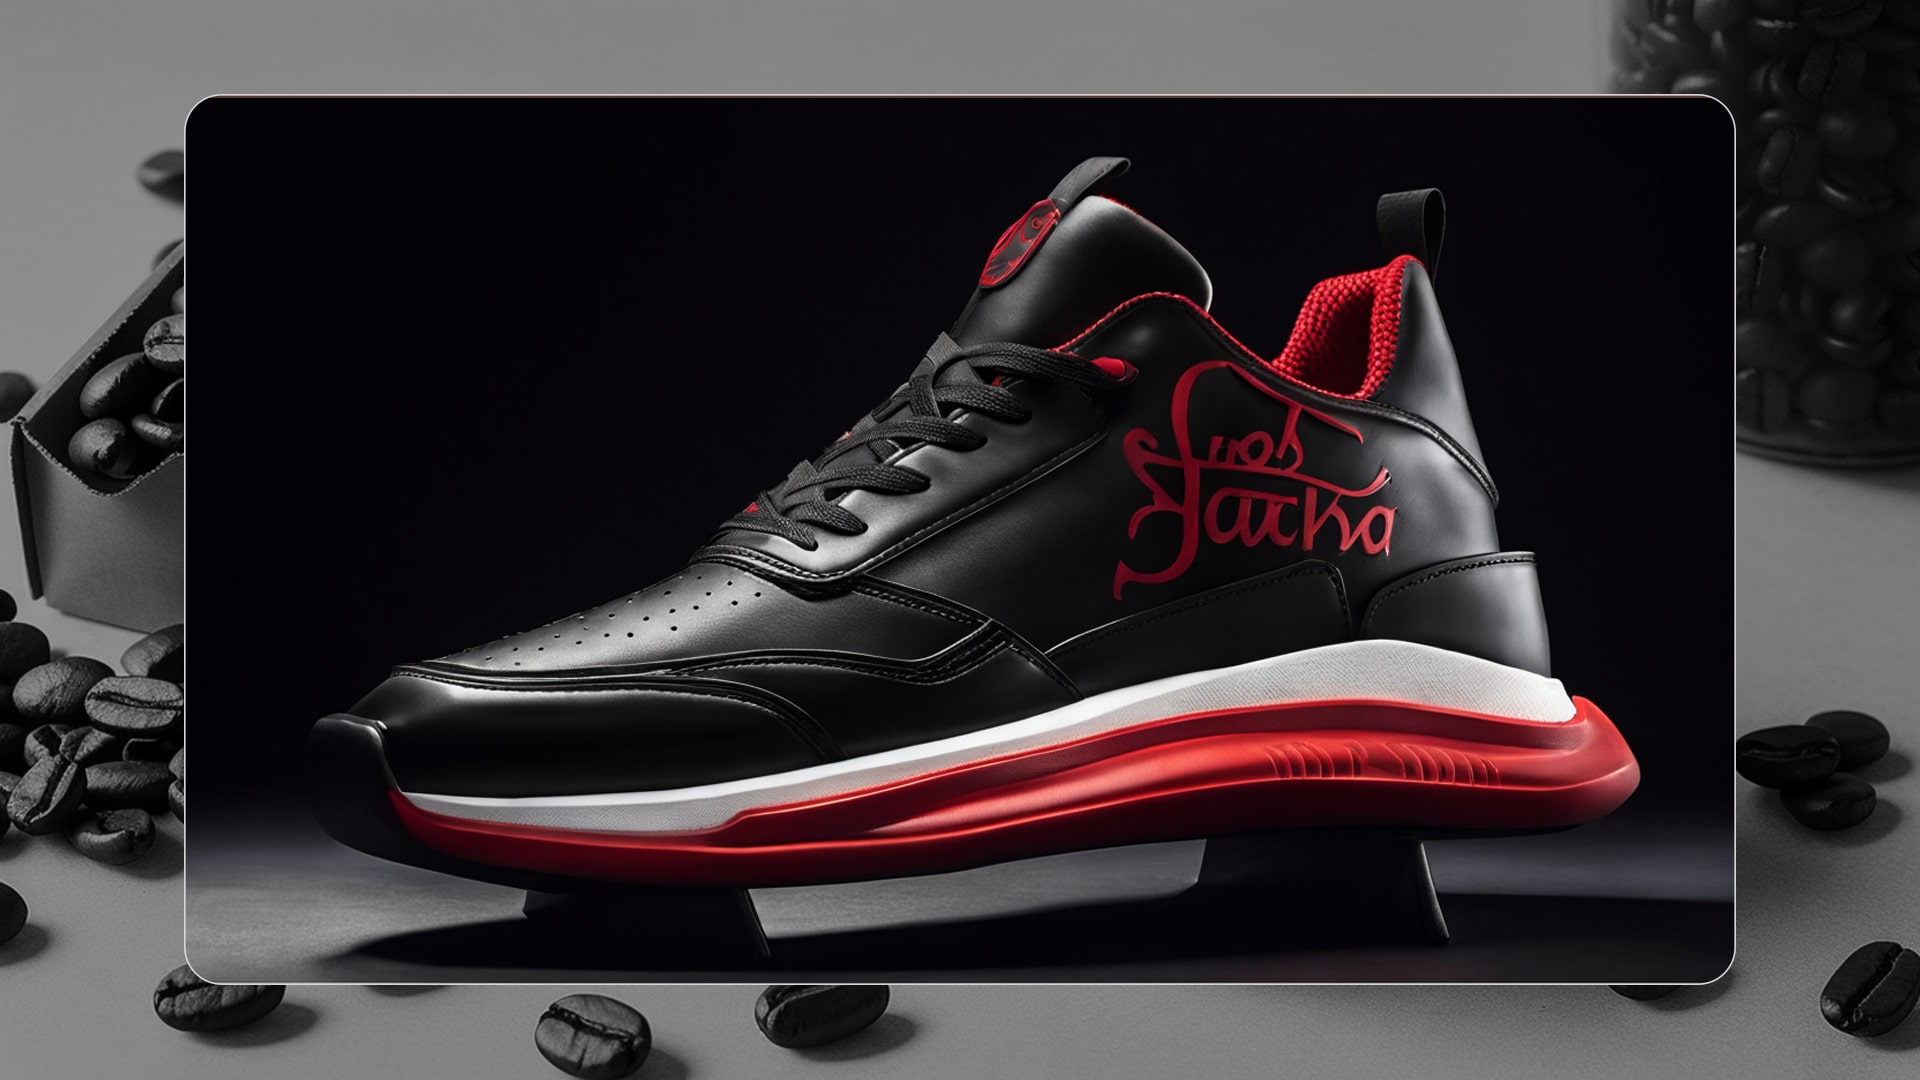 Black athletic sneakers with white sole and red logo